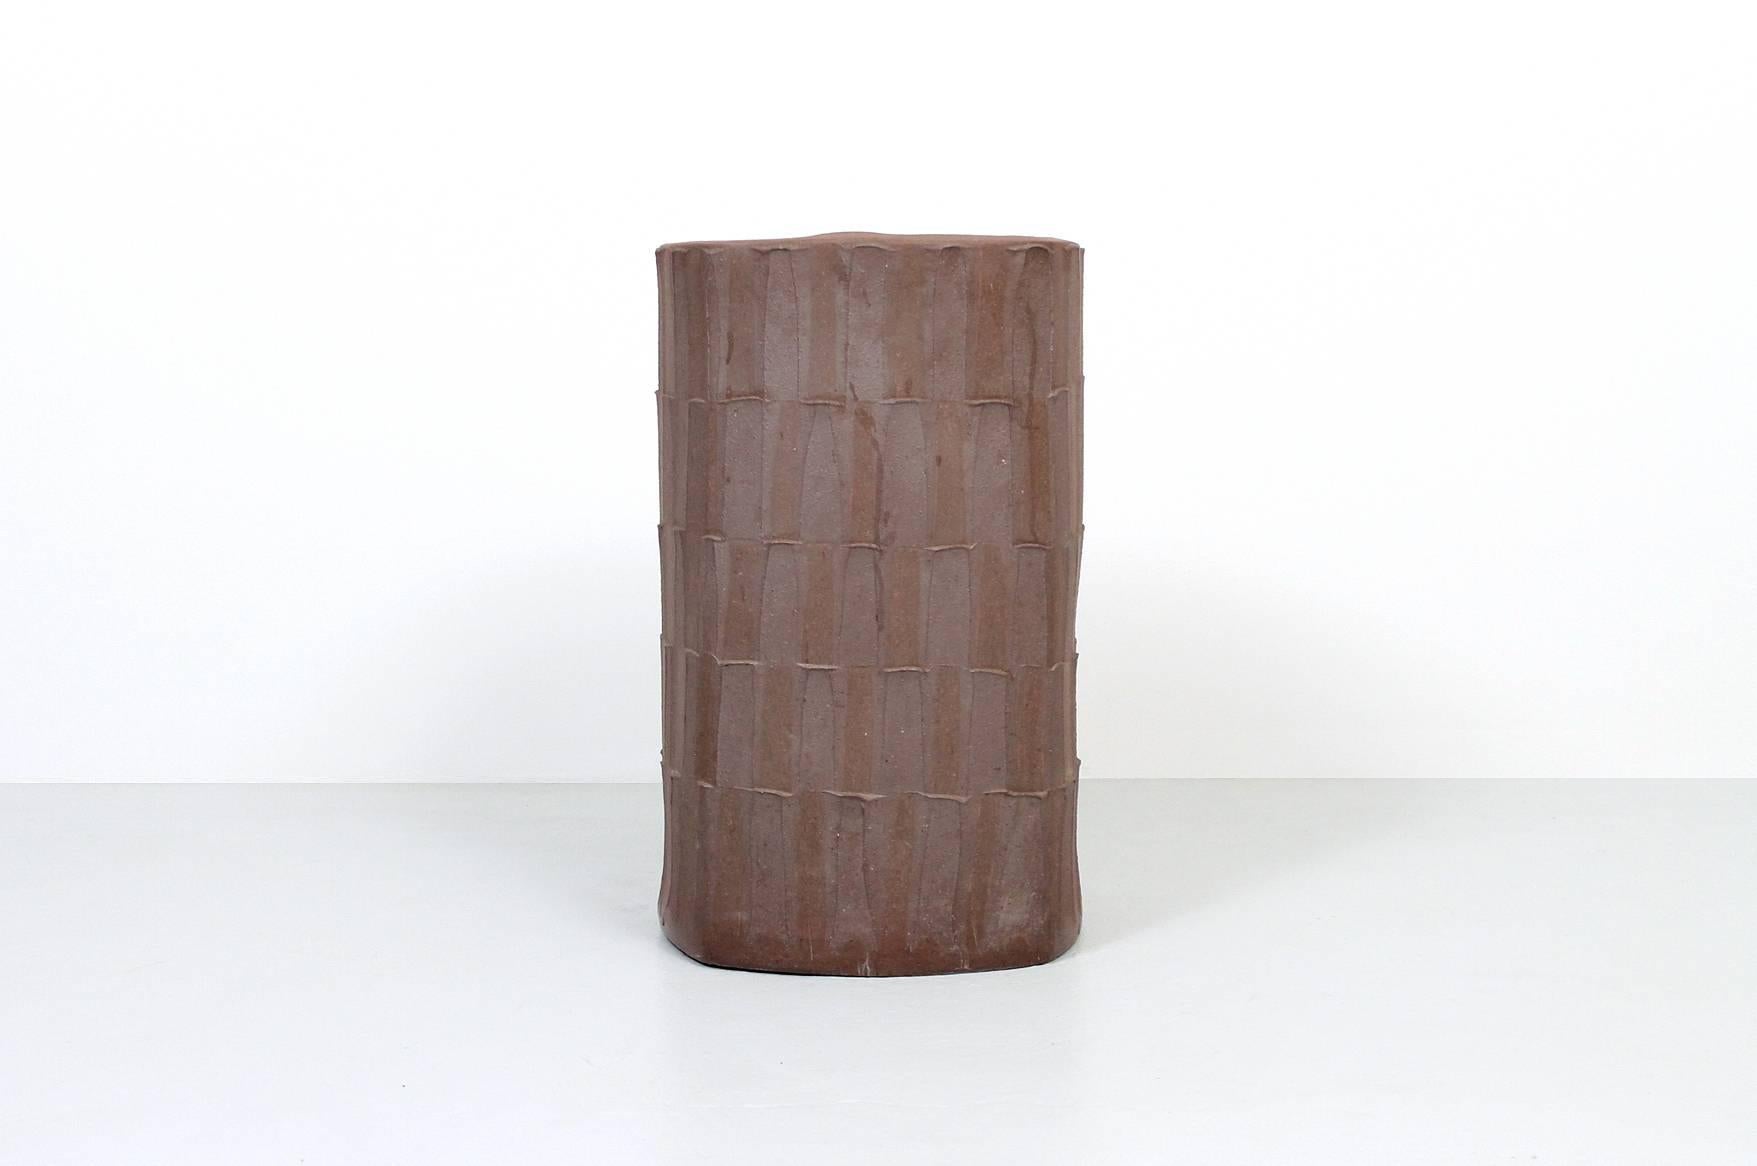 Rare large stoneware umbrella stand designed by David Cressey for the Architectural Pottery pro or artisan series.